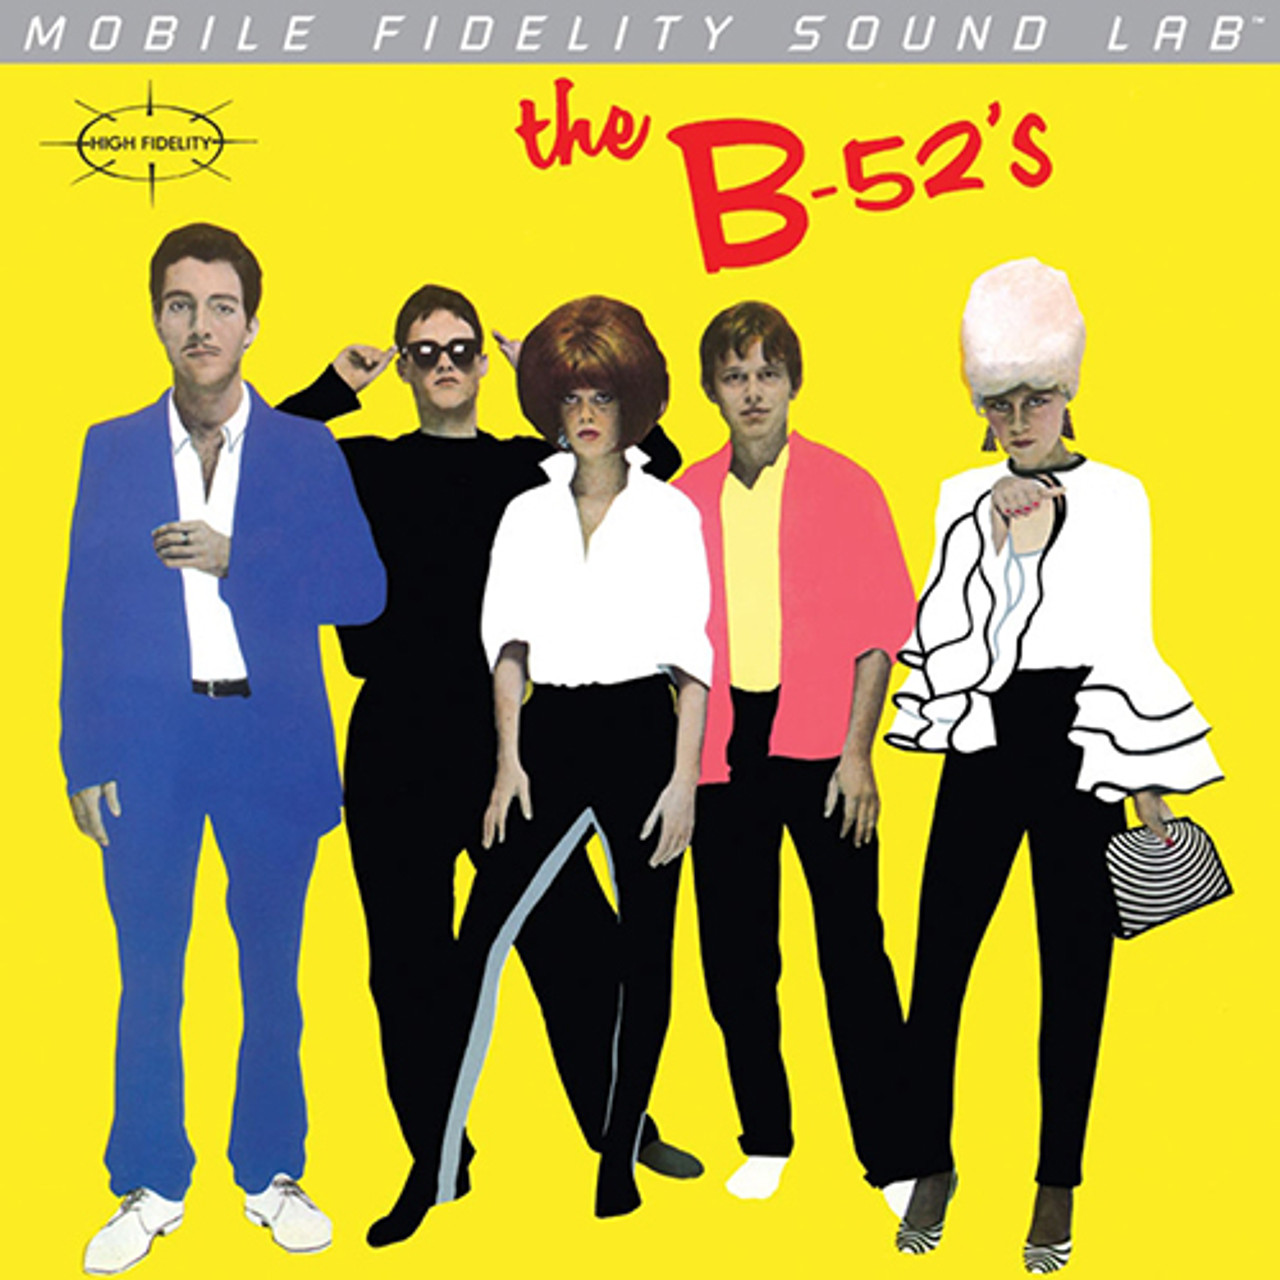 The B-52'S - The B-52'S (Numbered Vinyl LP)